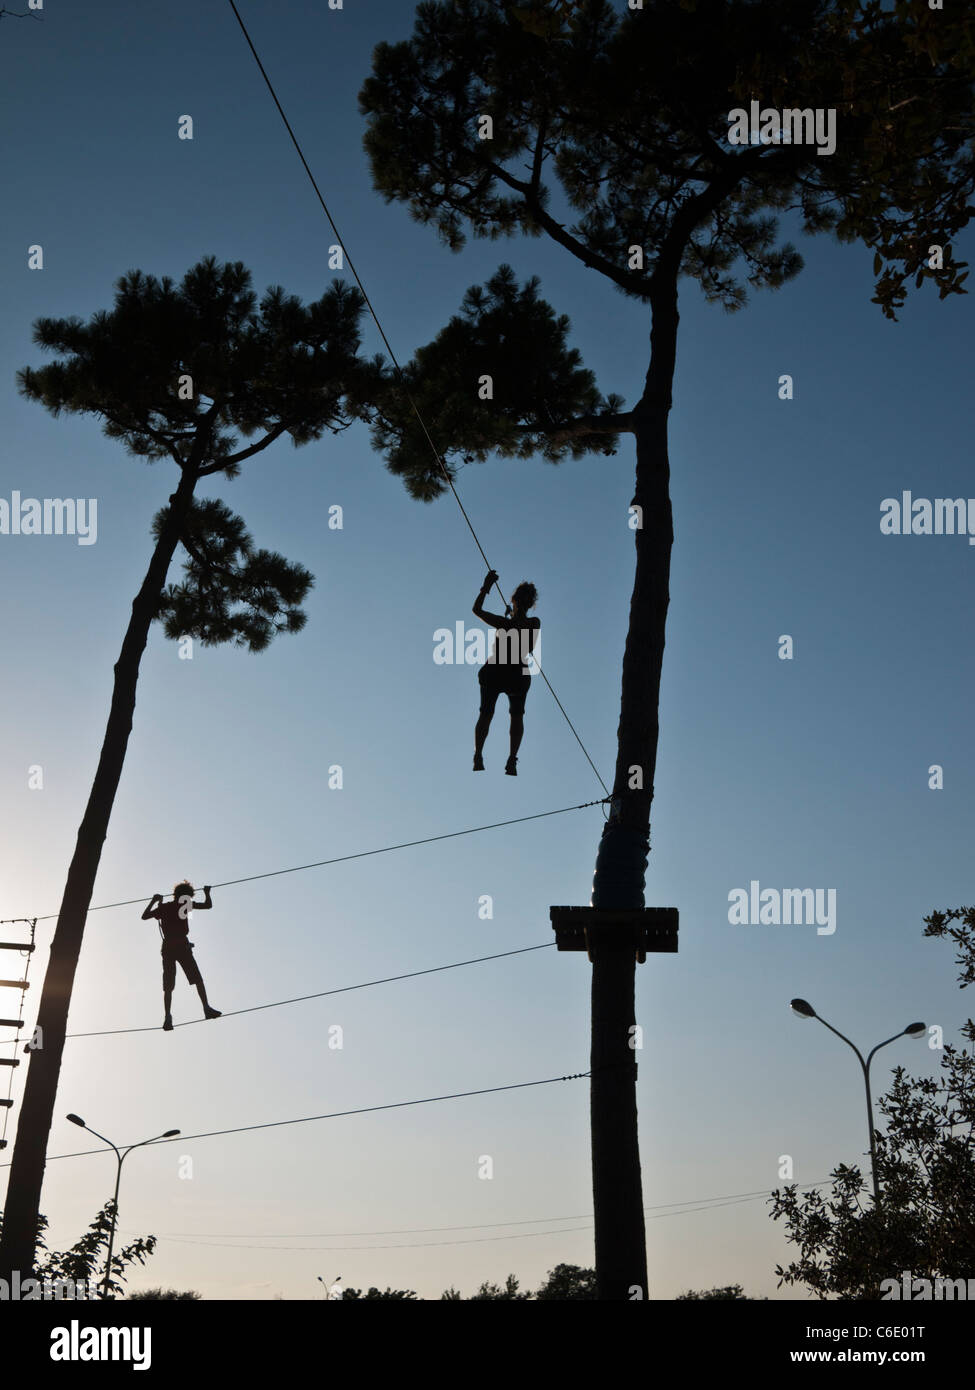 High wire, aerial adventures in the forest, tightrope walking fun